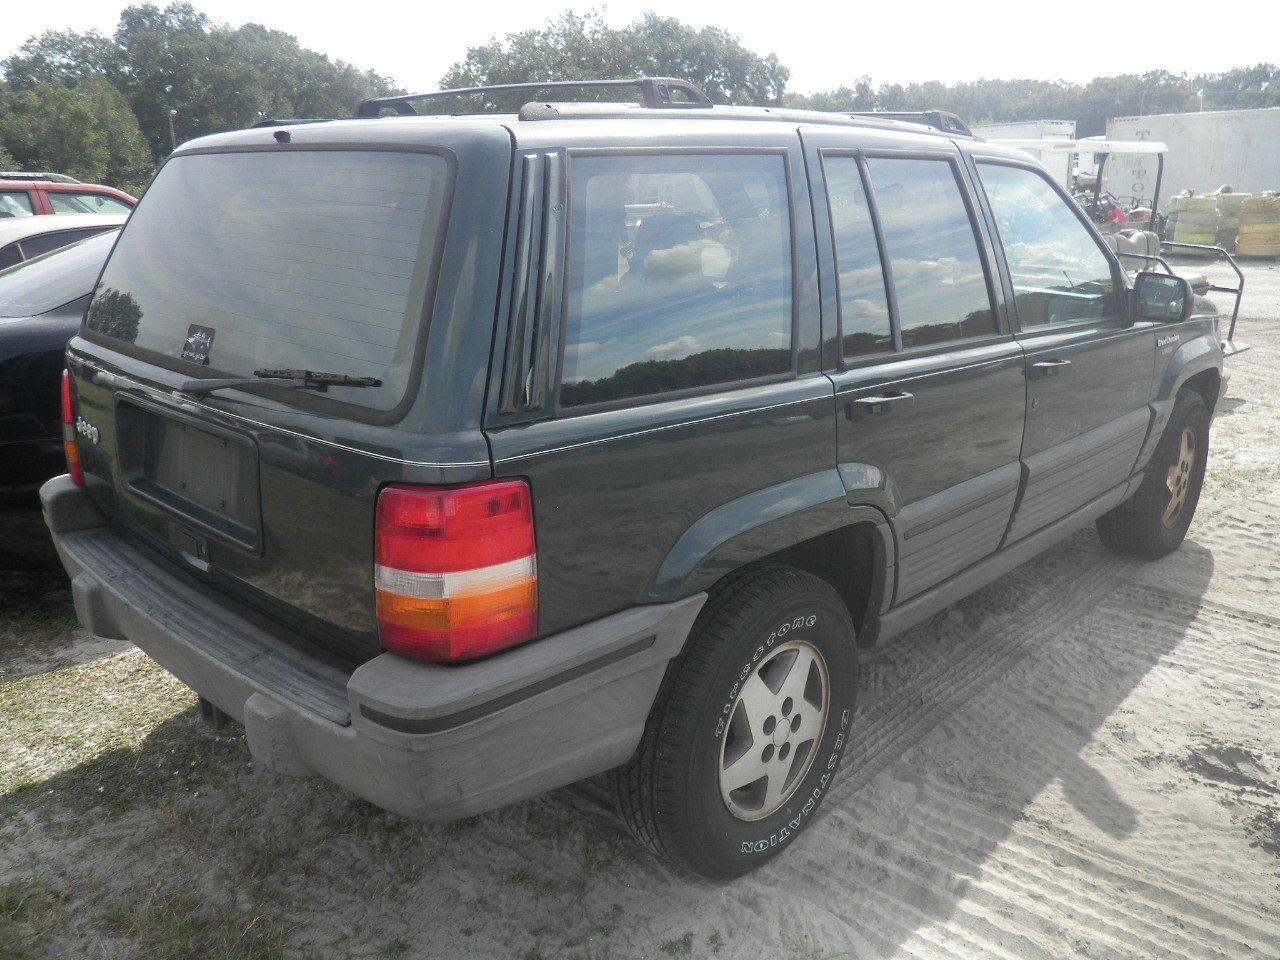 11-05134 (Cars-SUV 4D)  Seller:Private/Dealer 1993 JEEP CHEROKEE